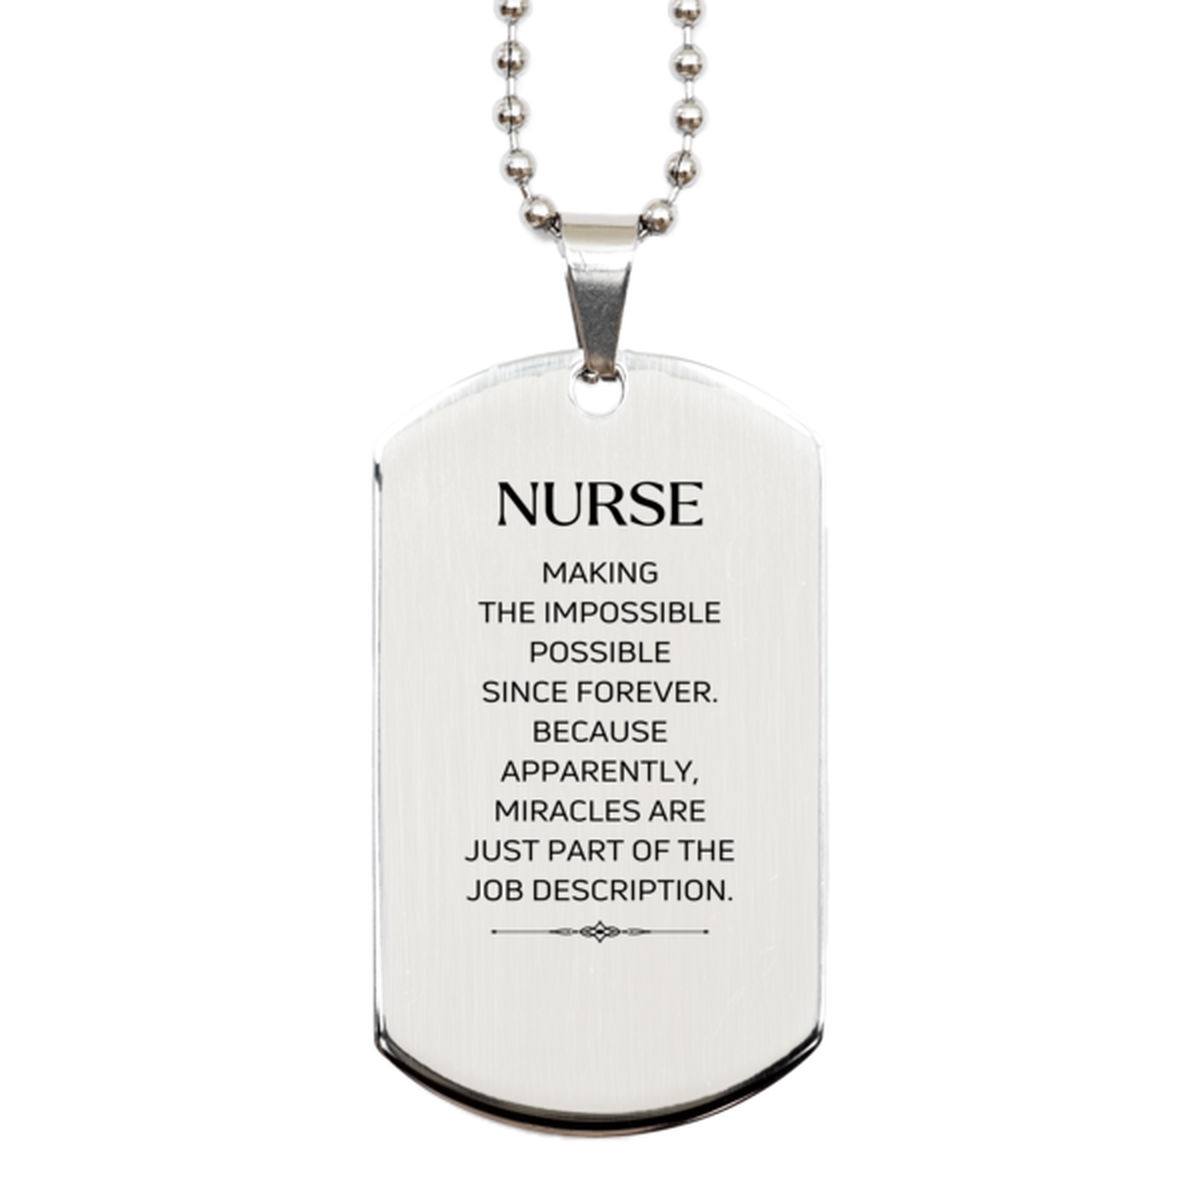 Funny Nurse Gifts, Miracles are just part of the job description, Inspirational Birthday Silver Dog Tag For Nurse, Men, Women, Coworkers, Friends, Boss